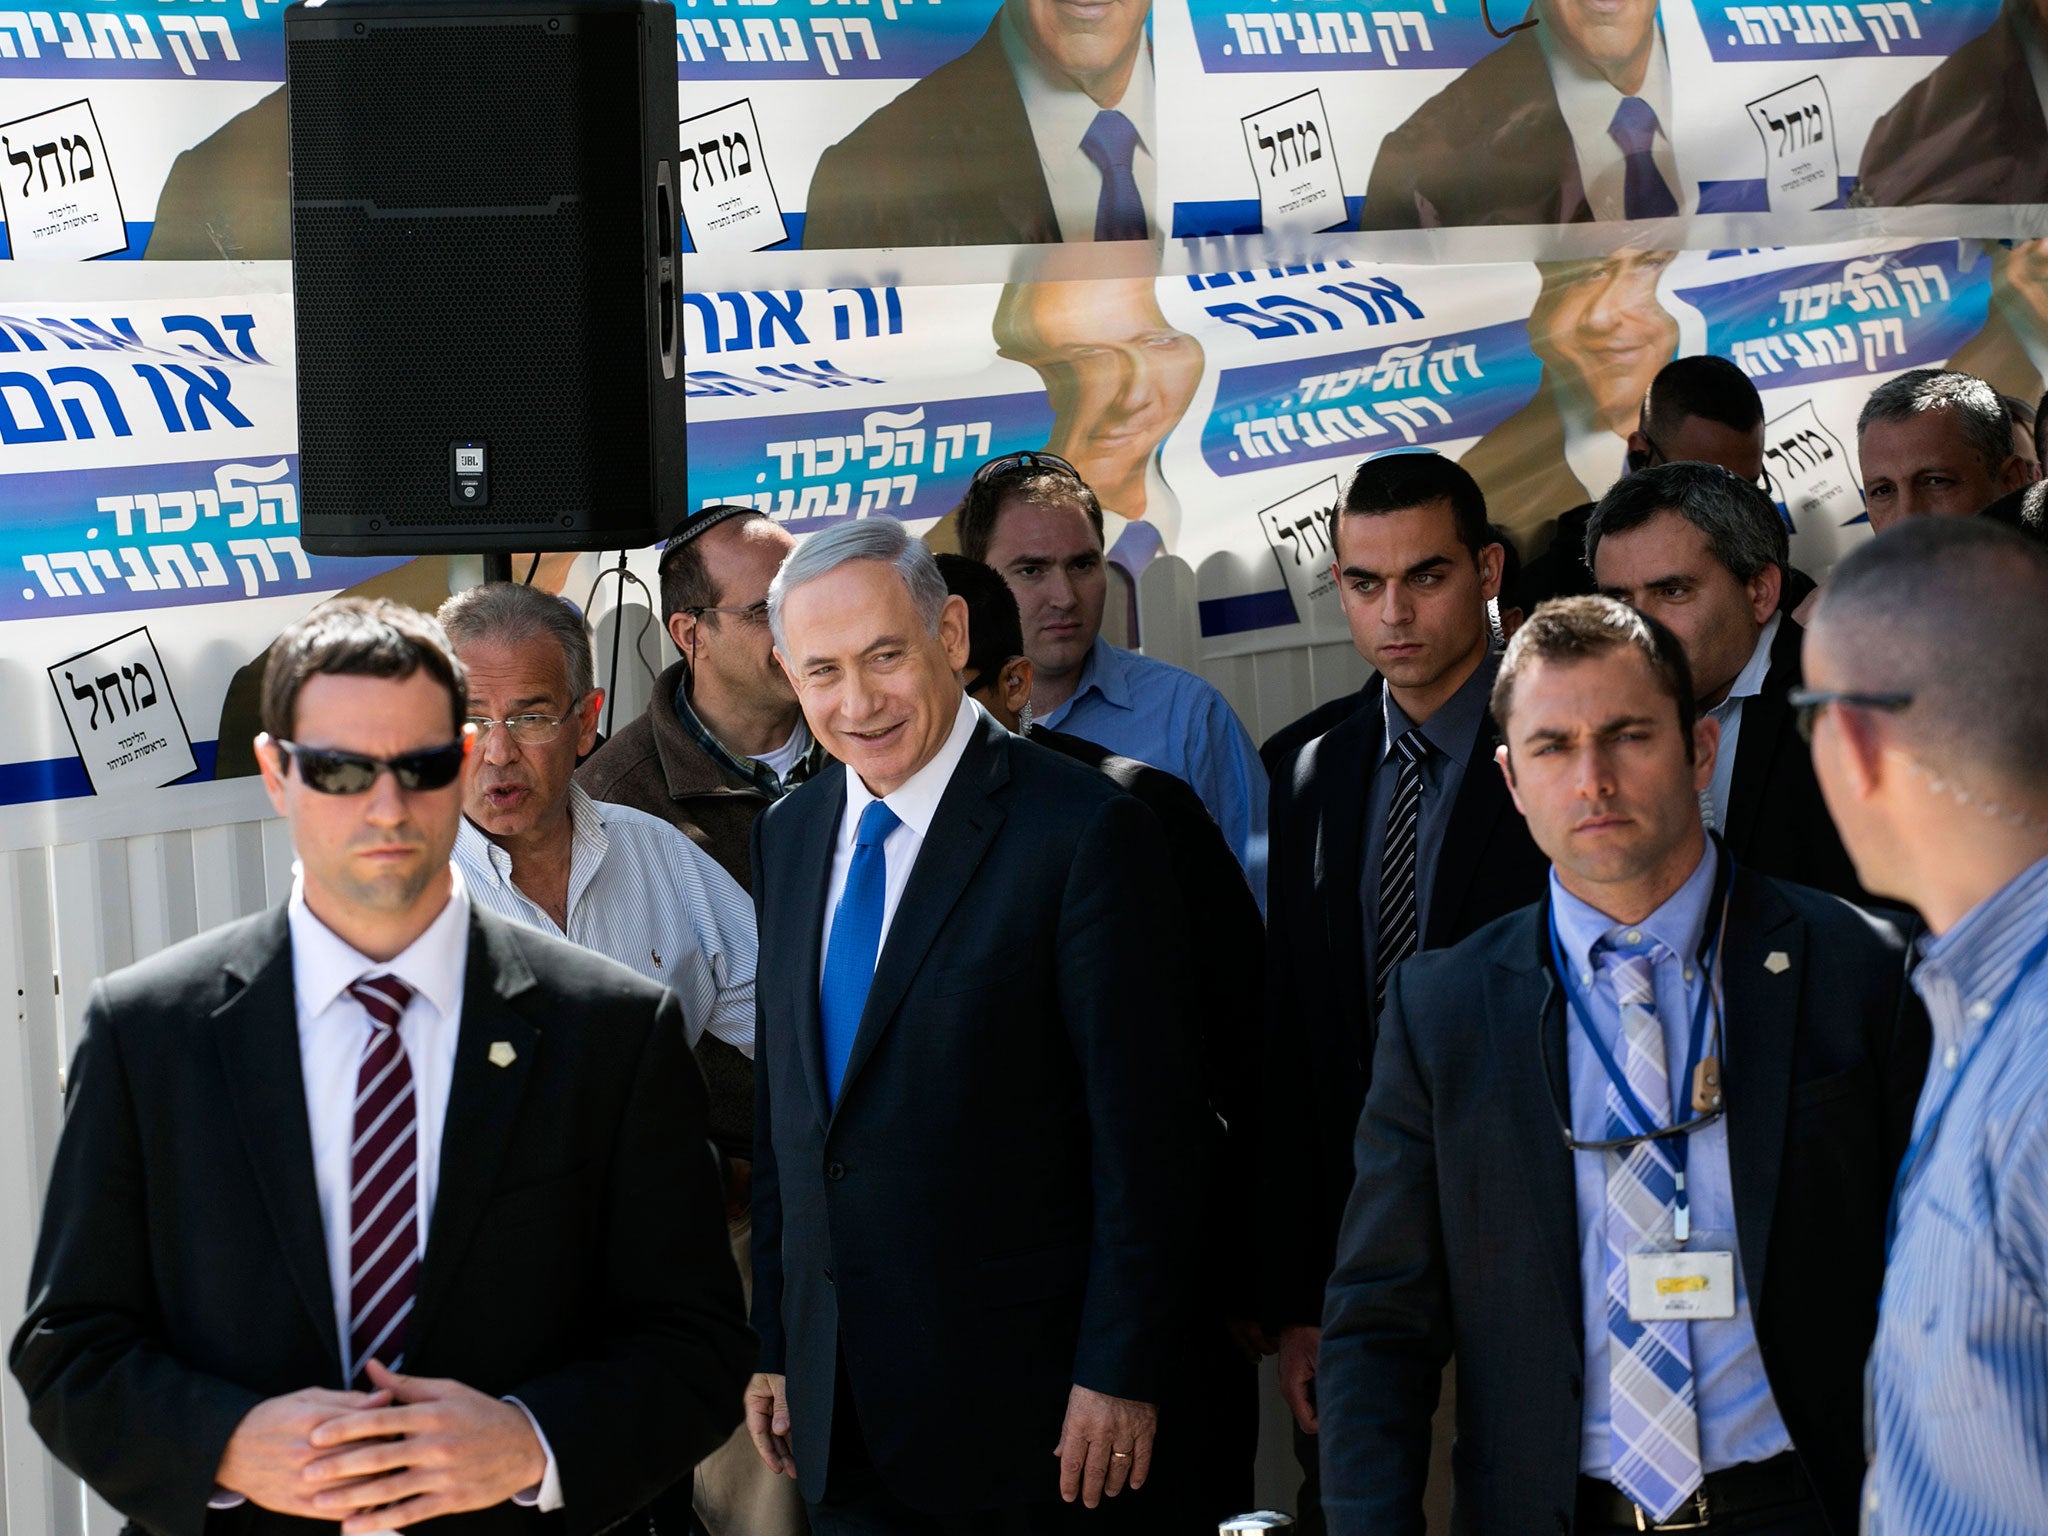 Israeli Prime Minister Benjamin Netanyahu, center, visits a construction site in Har Homa, east Jerusalem, a day ahead of legislative elections. Netanyahu is seeking his fourth term as prime minister